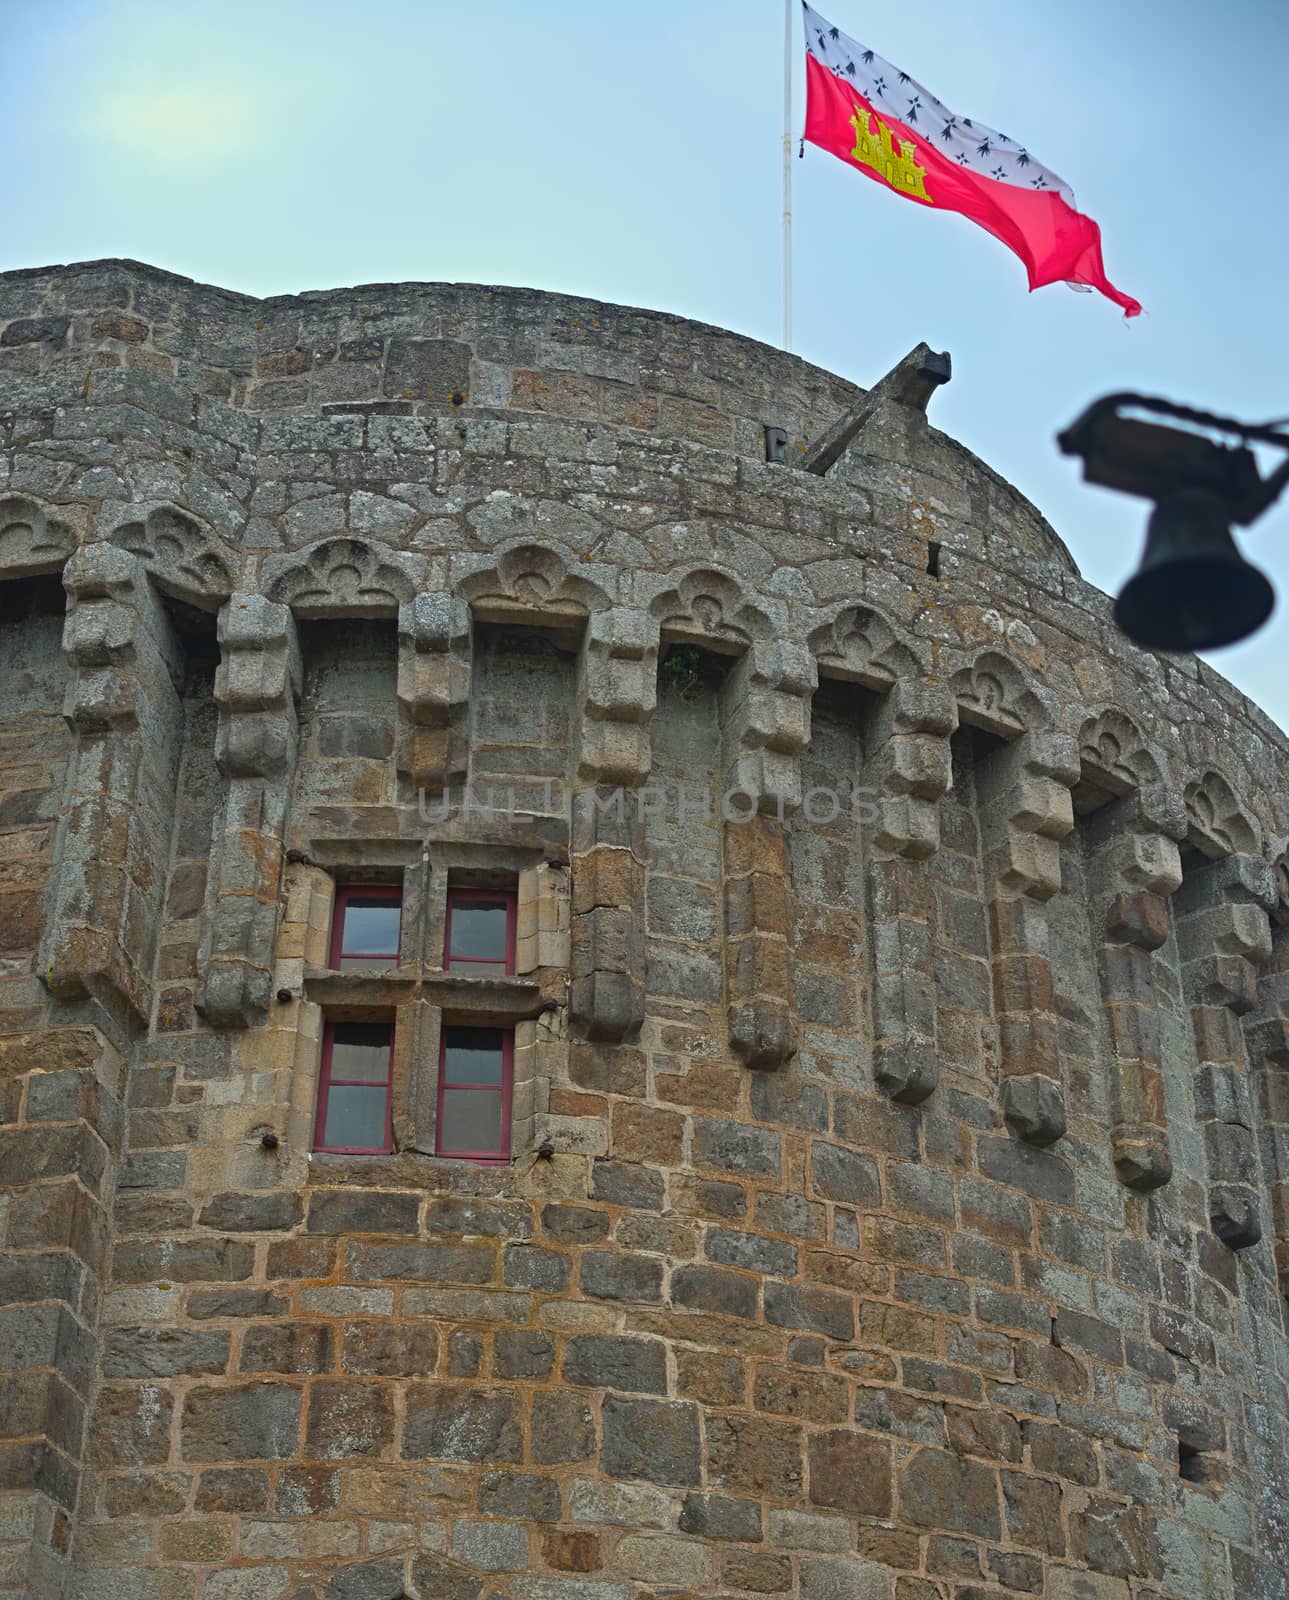 Big central stone tower with flag on top at Dinan fortress, France by sheriffkule